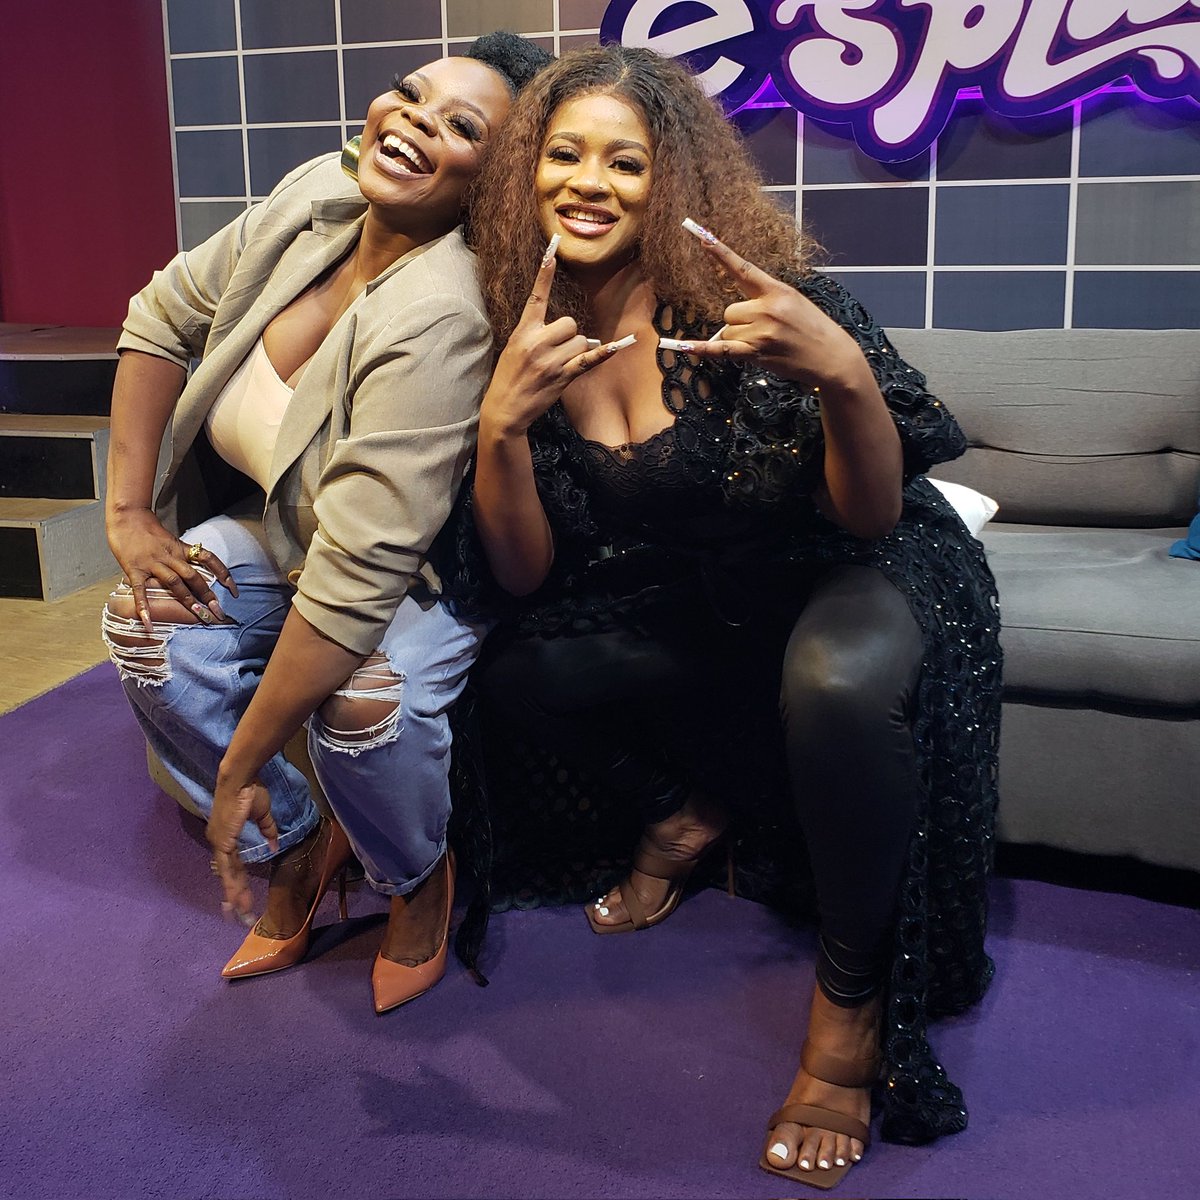 The Hype Priestess with the vibes, @unusualphyna was on #ESplashOnTvc and trust me, it was all shades of 'Comot body, no join body, you join body, you collect. Who dey!!!' Who watched?